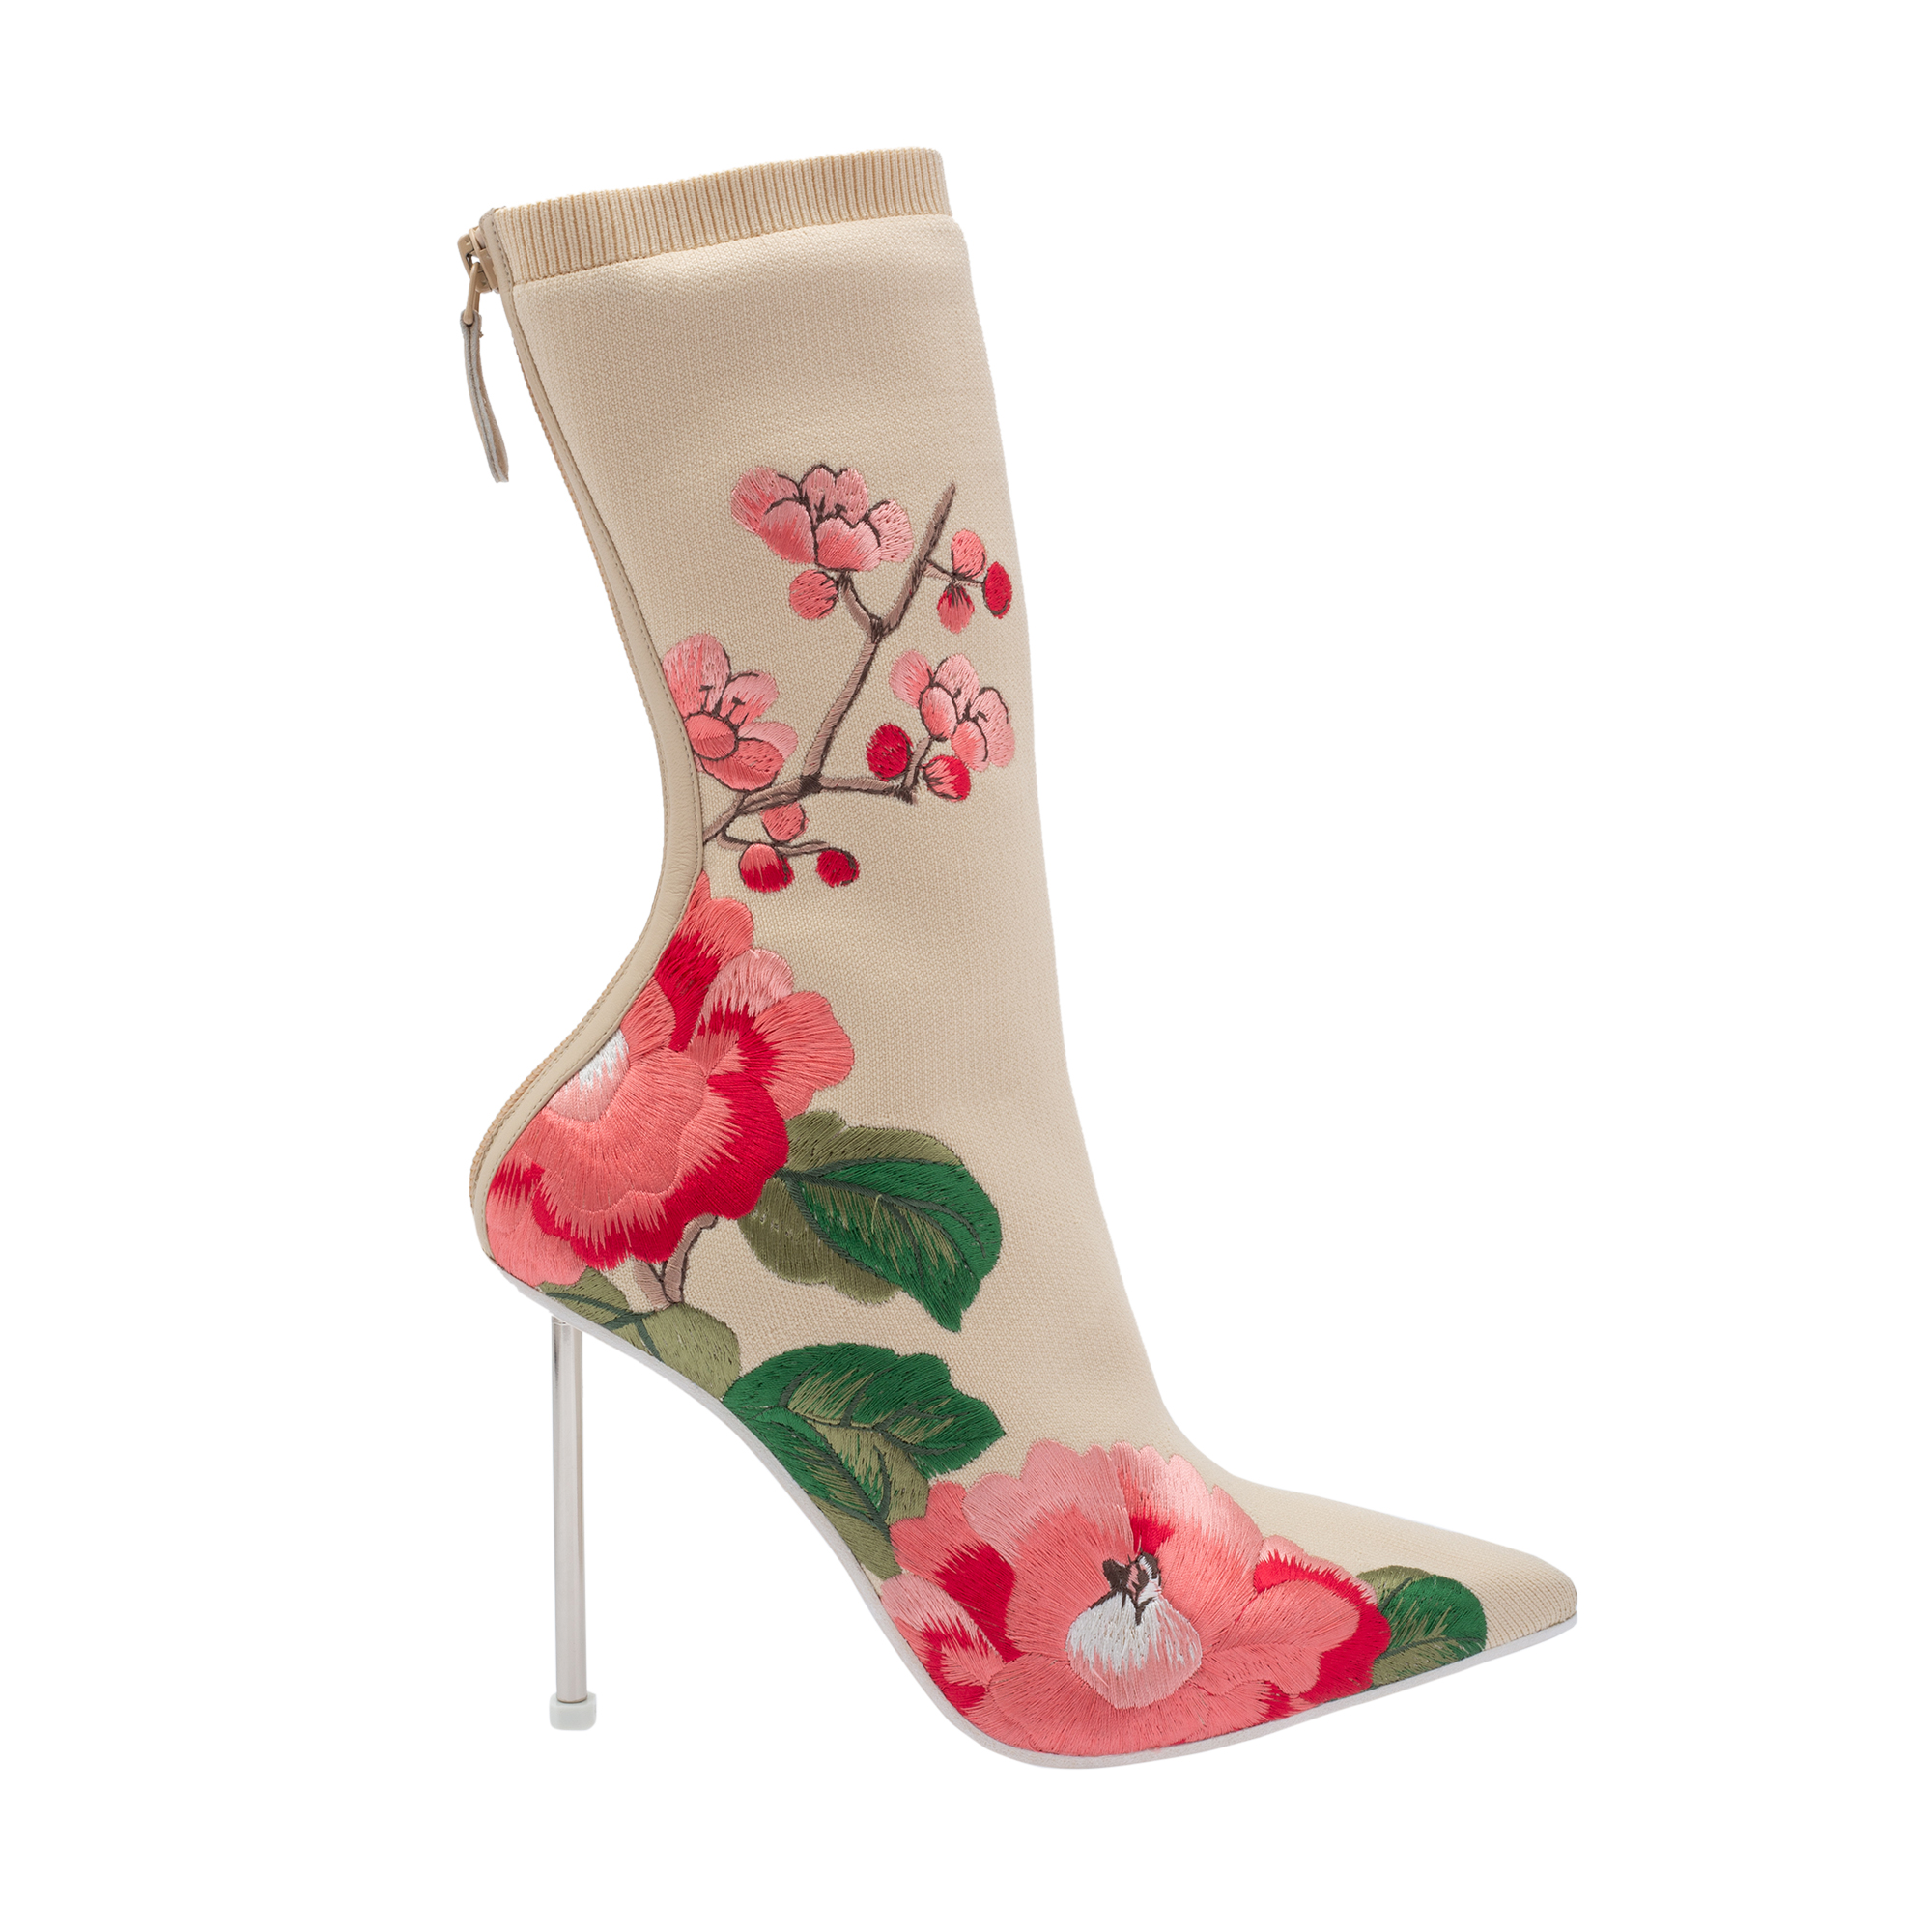 Floral embroidered sock boots